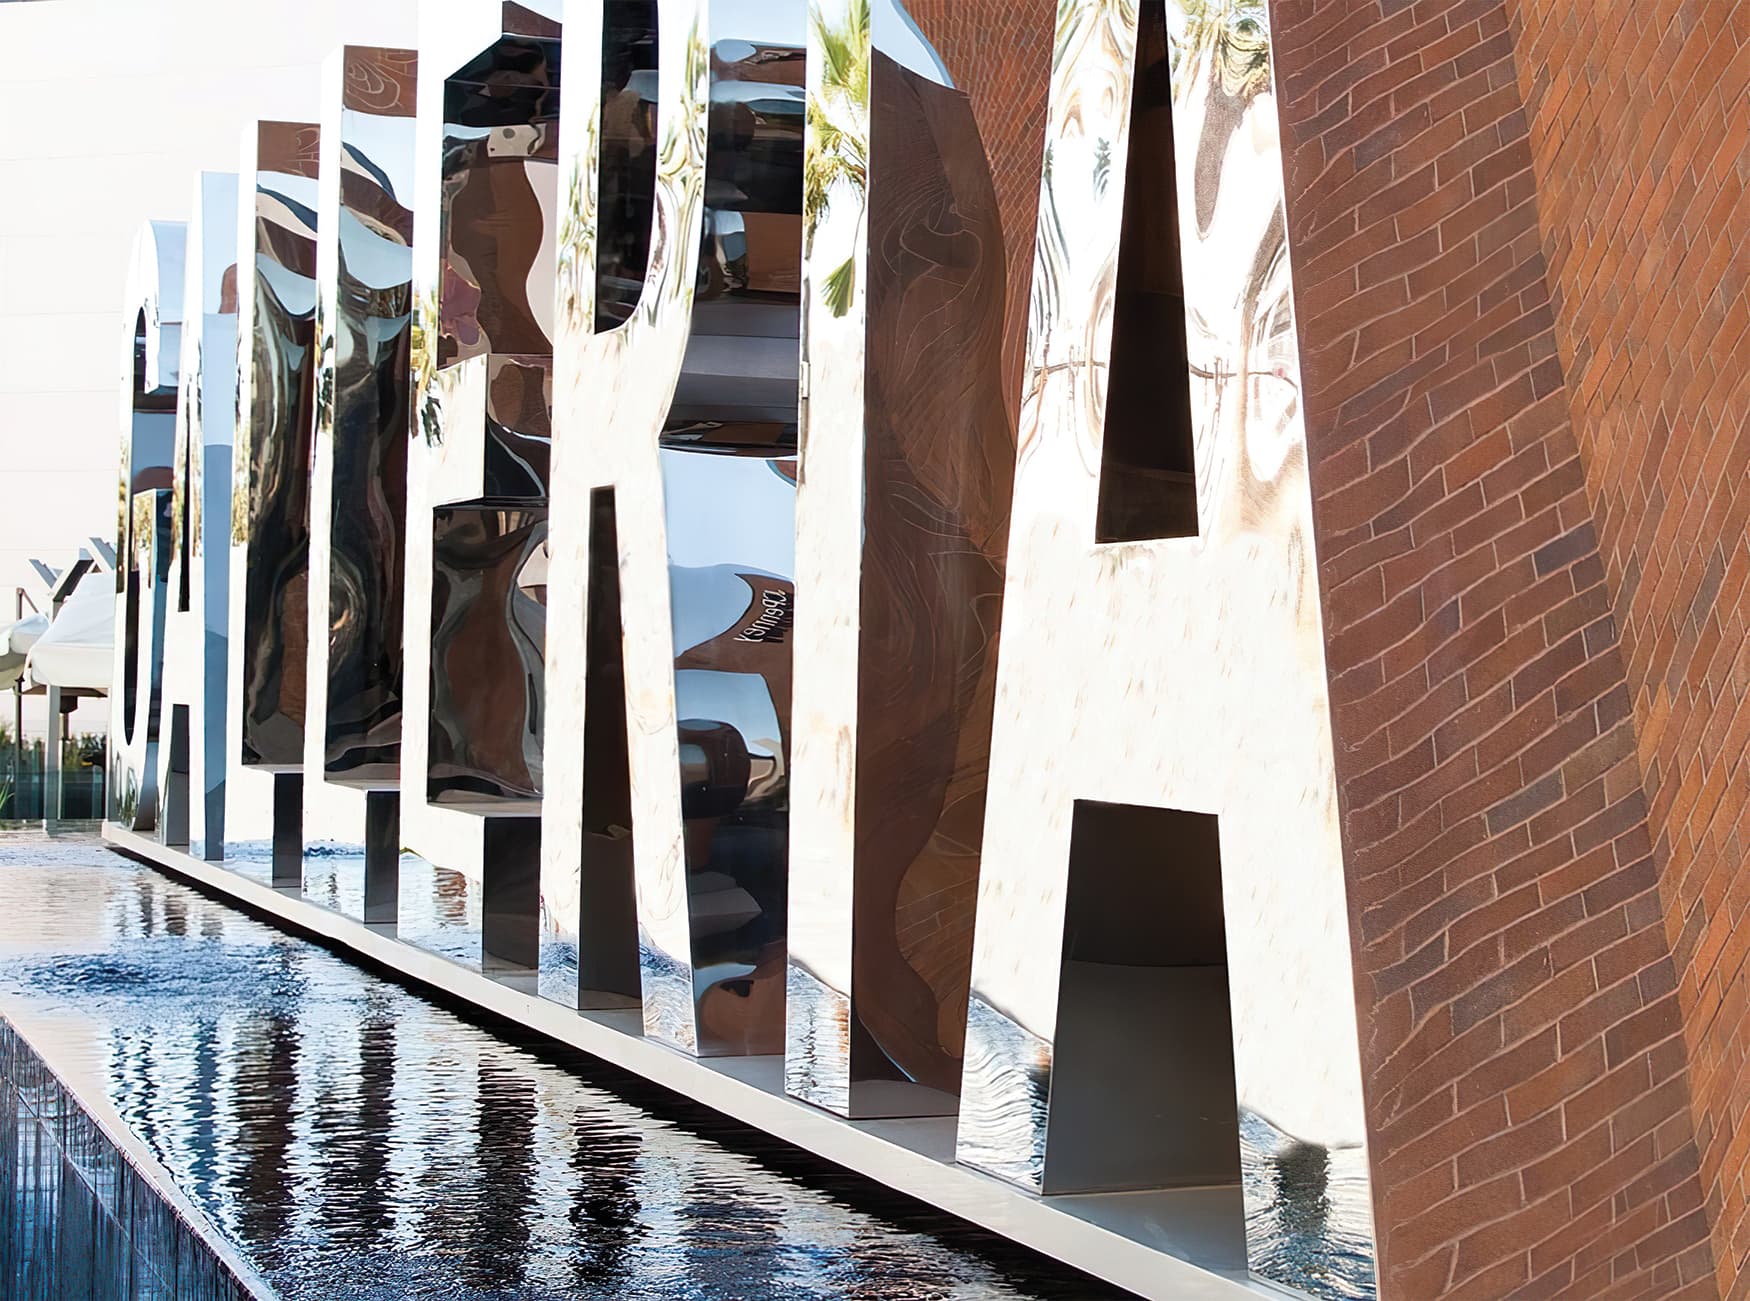 Glendale Galleria. A retail destination in Glendale, California. Sculptural Project Identity Monument with reflective chrome finish over a water feature.